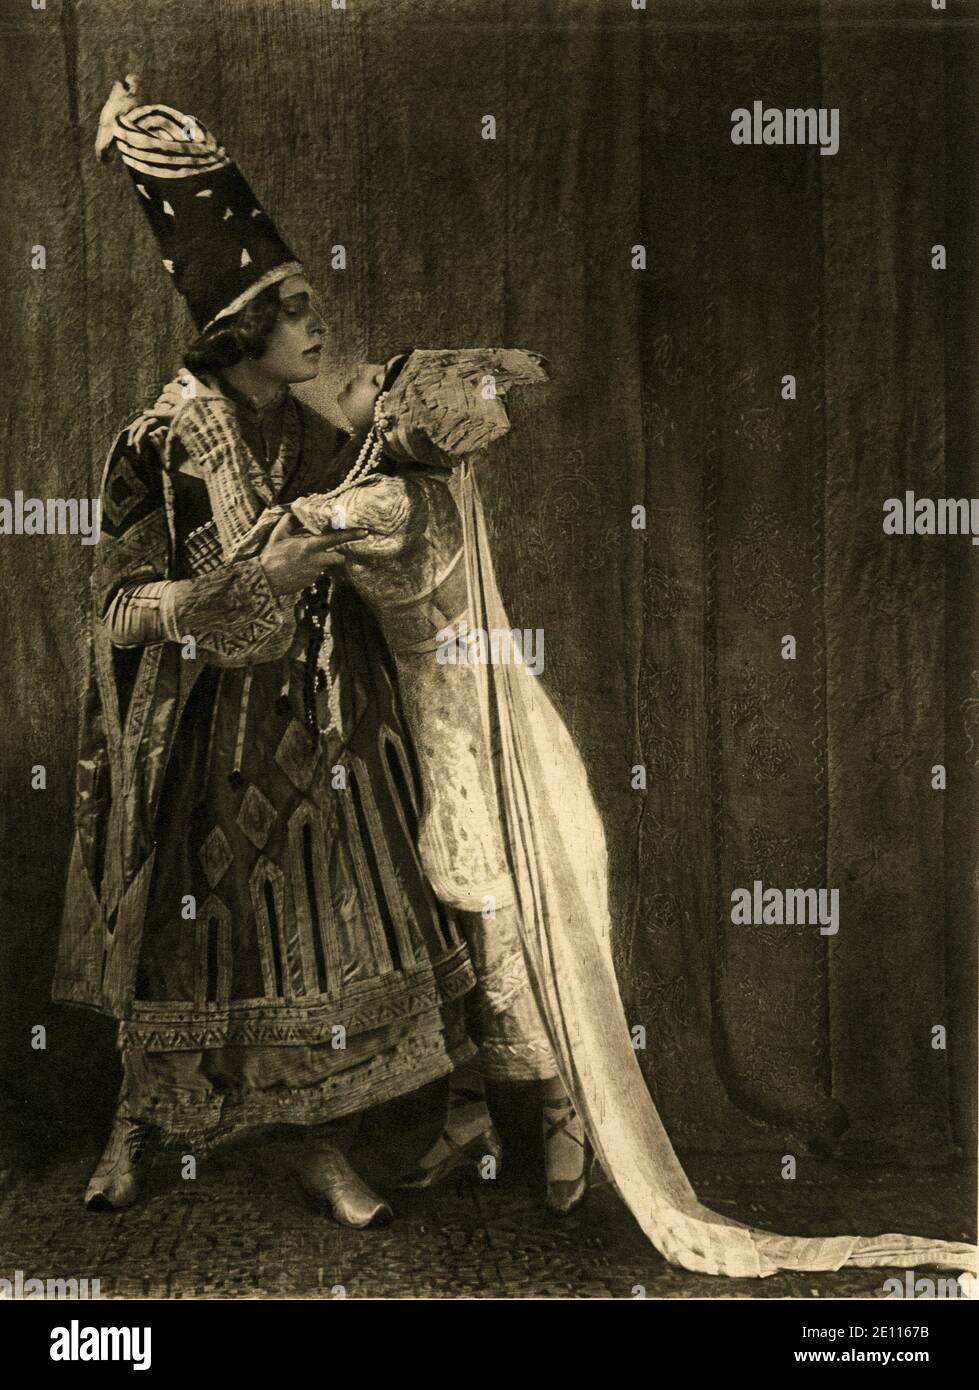 Emile Otto Hoppé and Bert, Studies Serge Diaghilev's Russian Ballet, 1913. The Ballet Russe Stock Photo